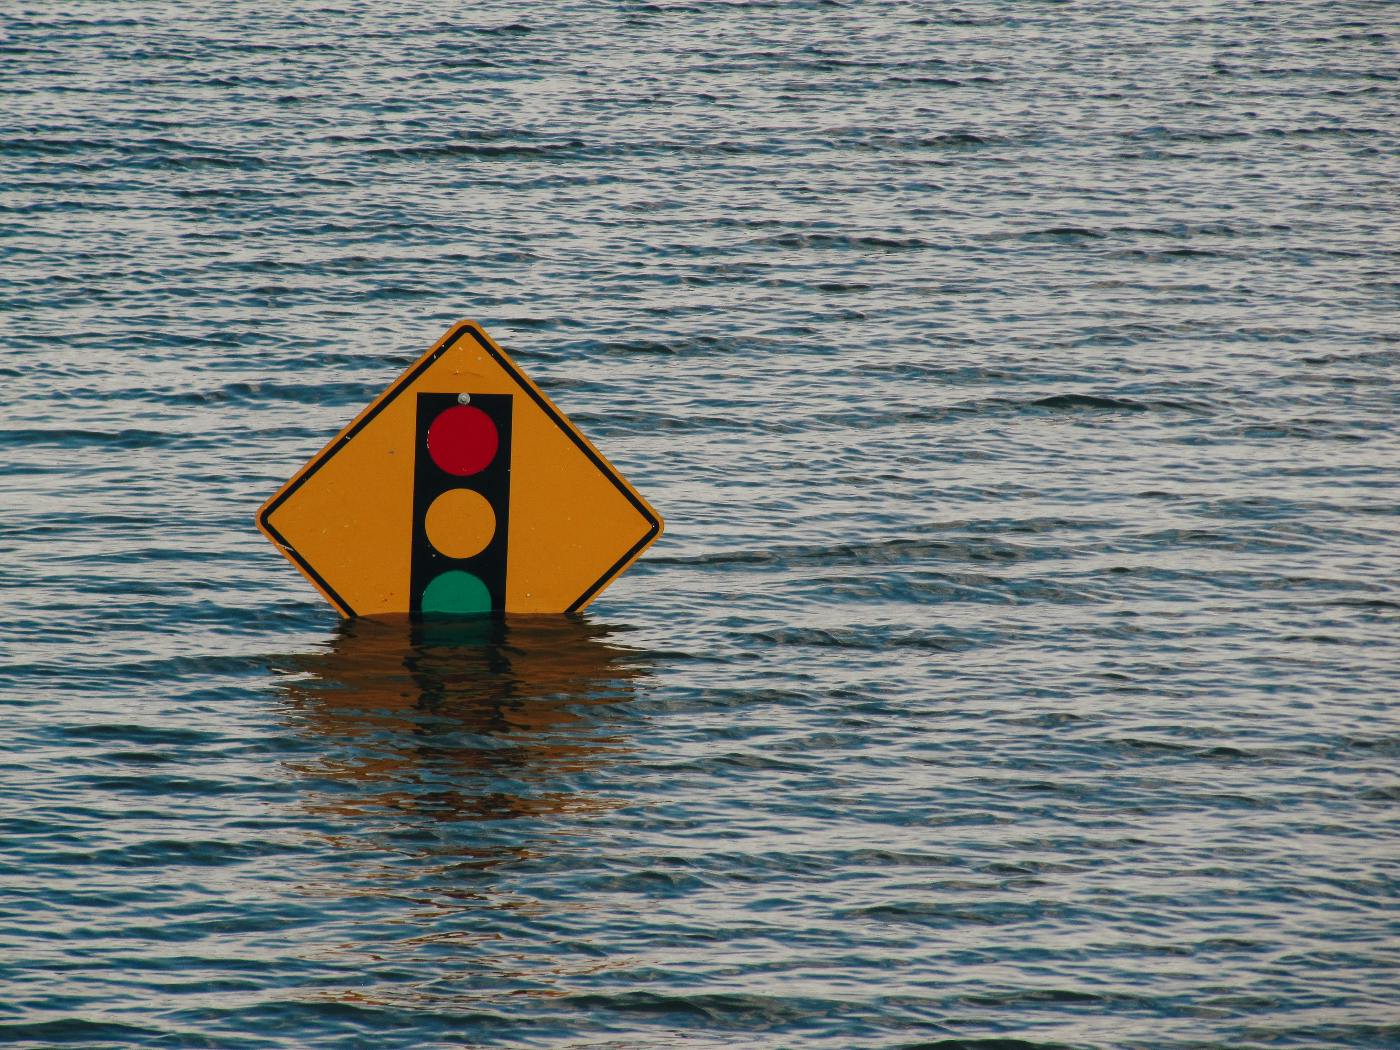 A traffic light sign partially submerged in water